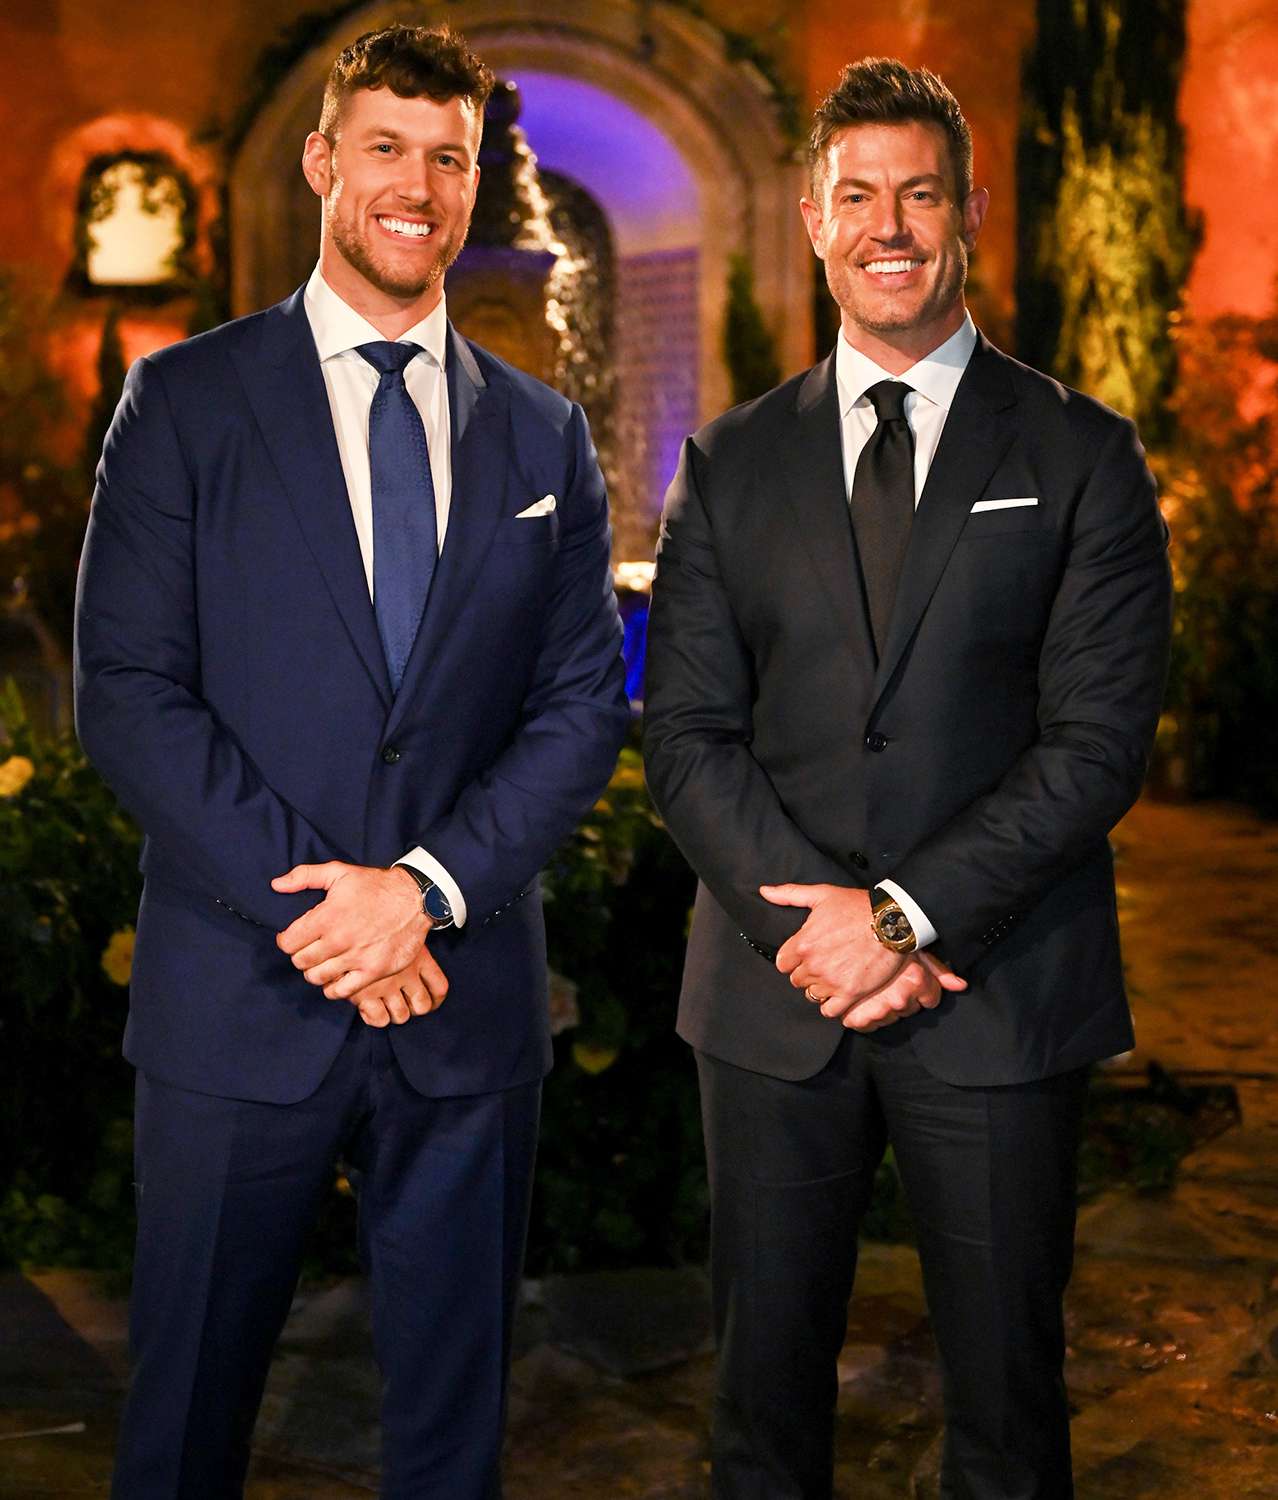 New host Jesse Palmer returns to the franchise to welcome Clayton and guide him through his first evening full of dramatic ups, downs and everything in between.